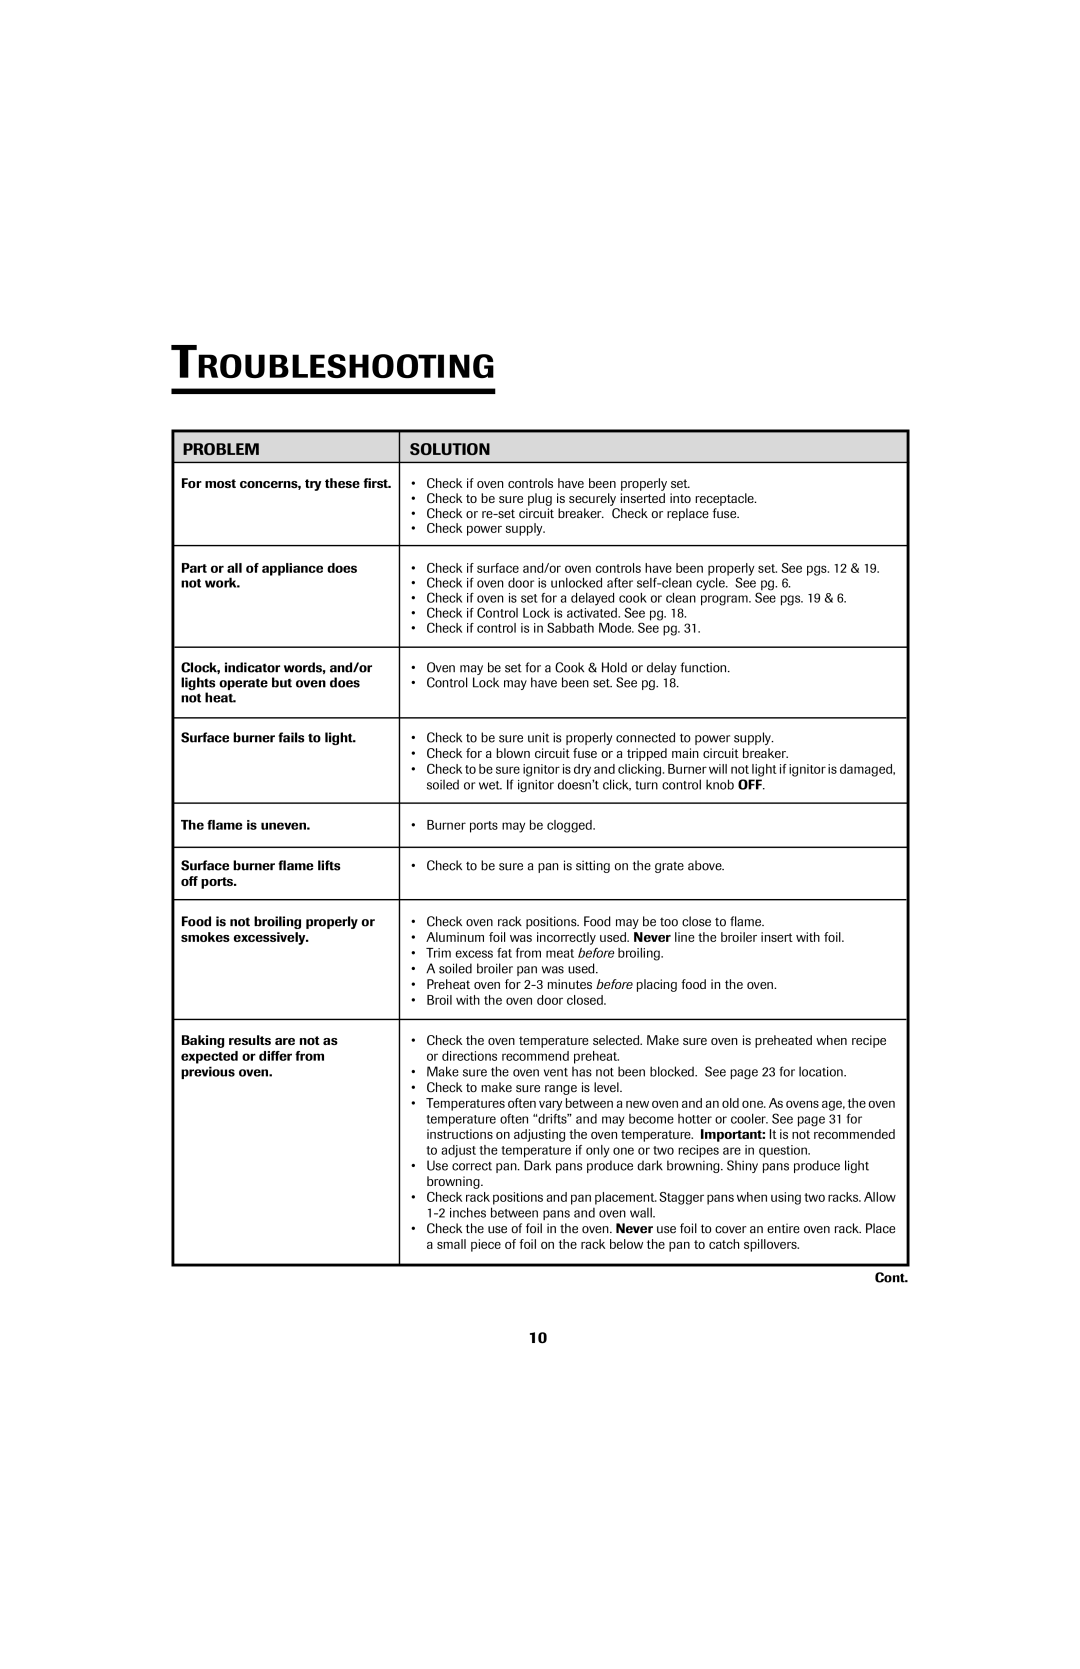 Jenn-Air 8113P753-60 important safety instructions Troubleshooting, Problem, Solution 